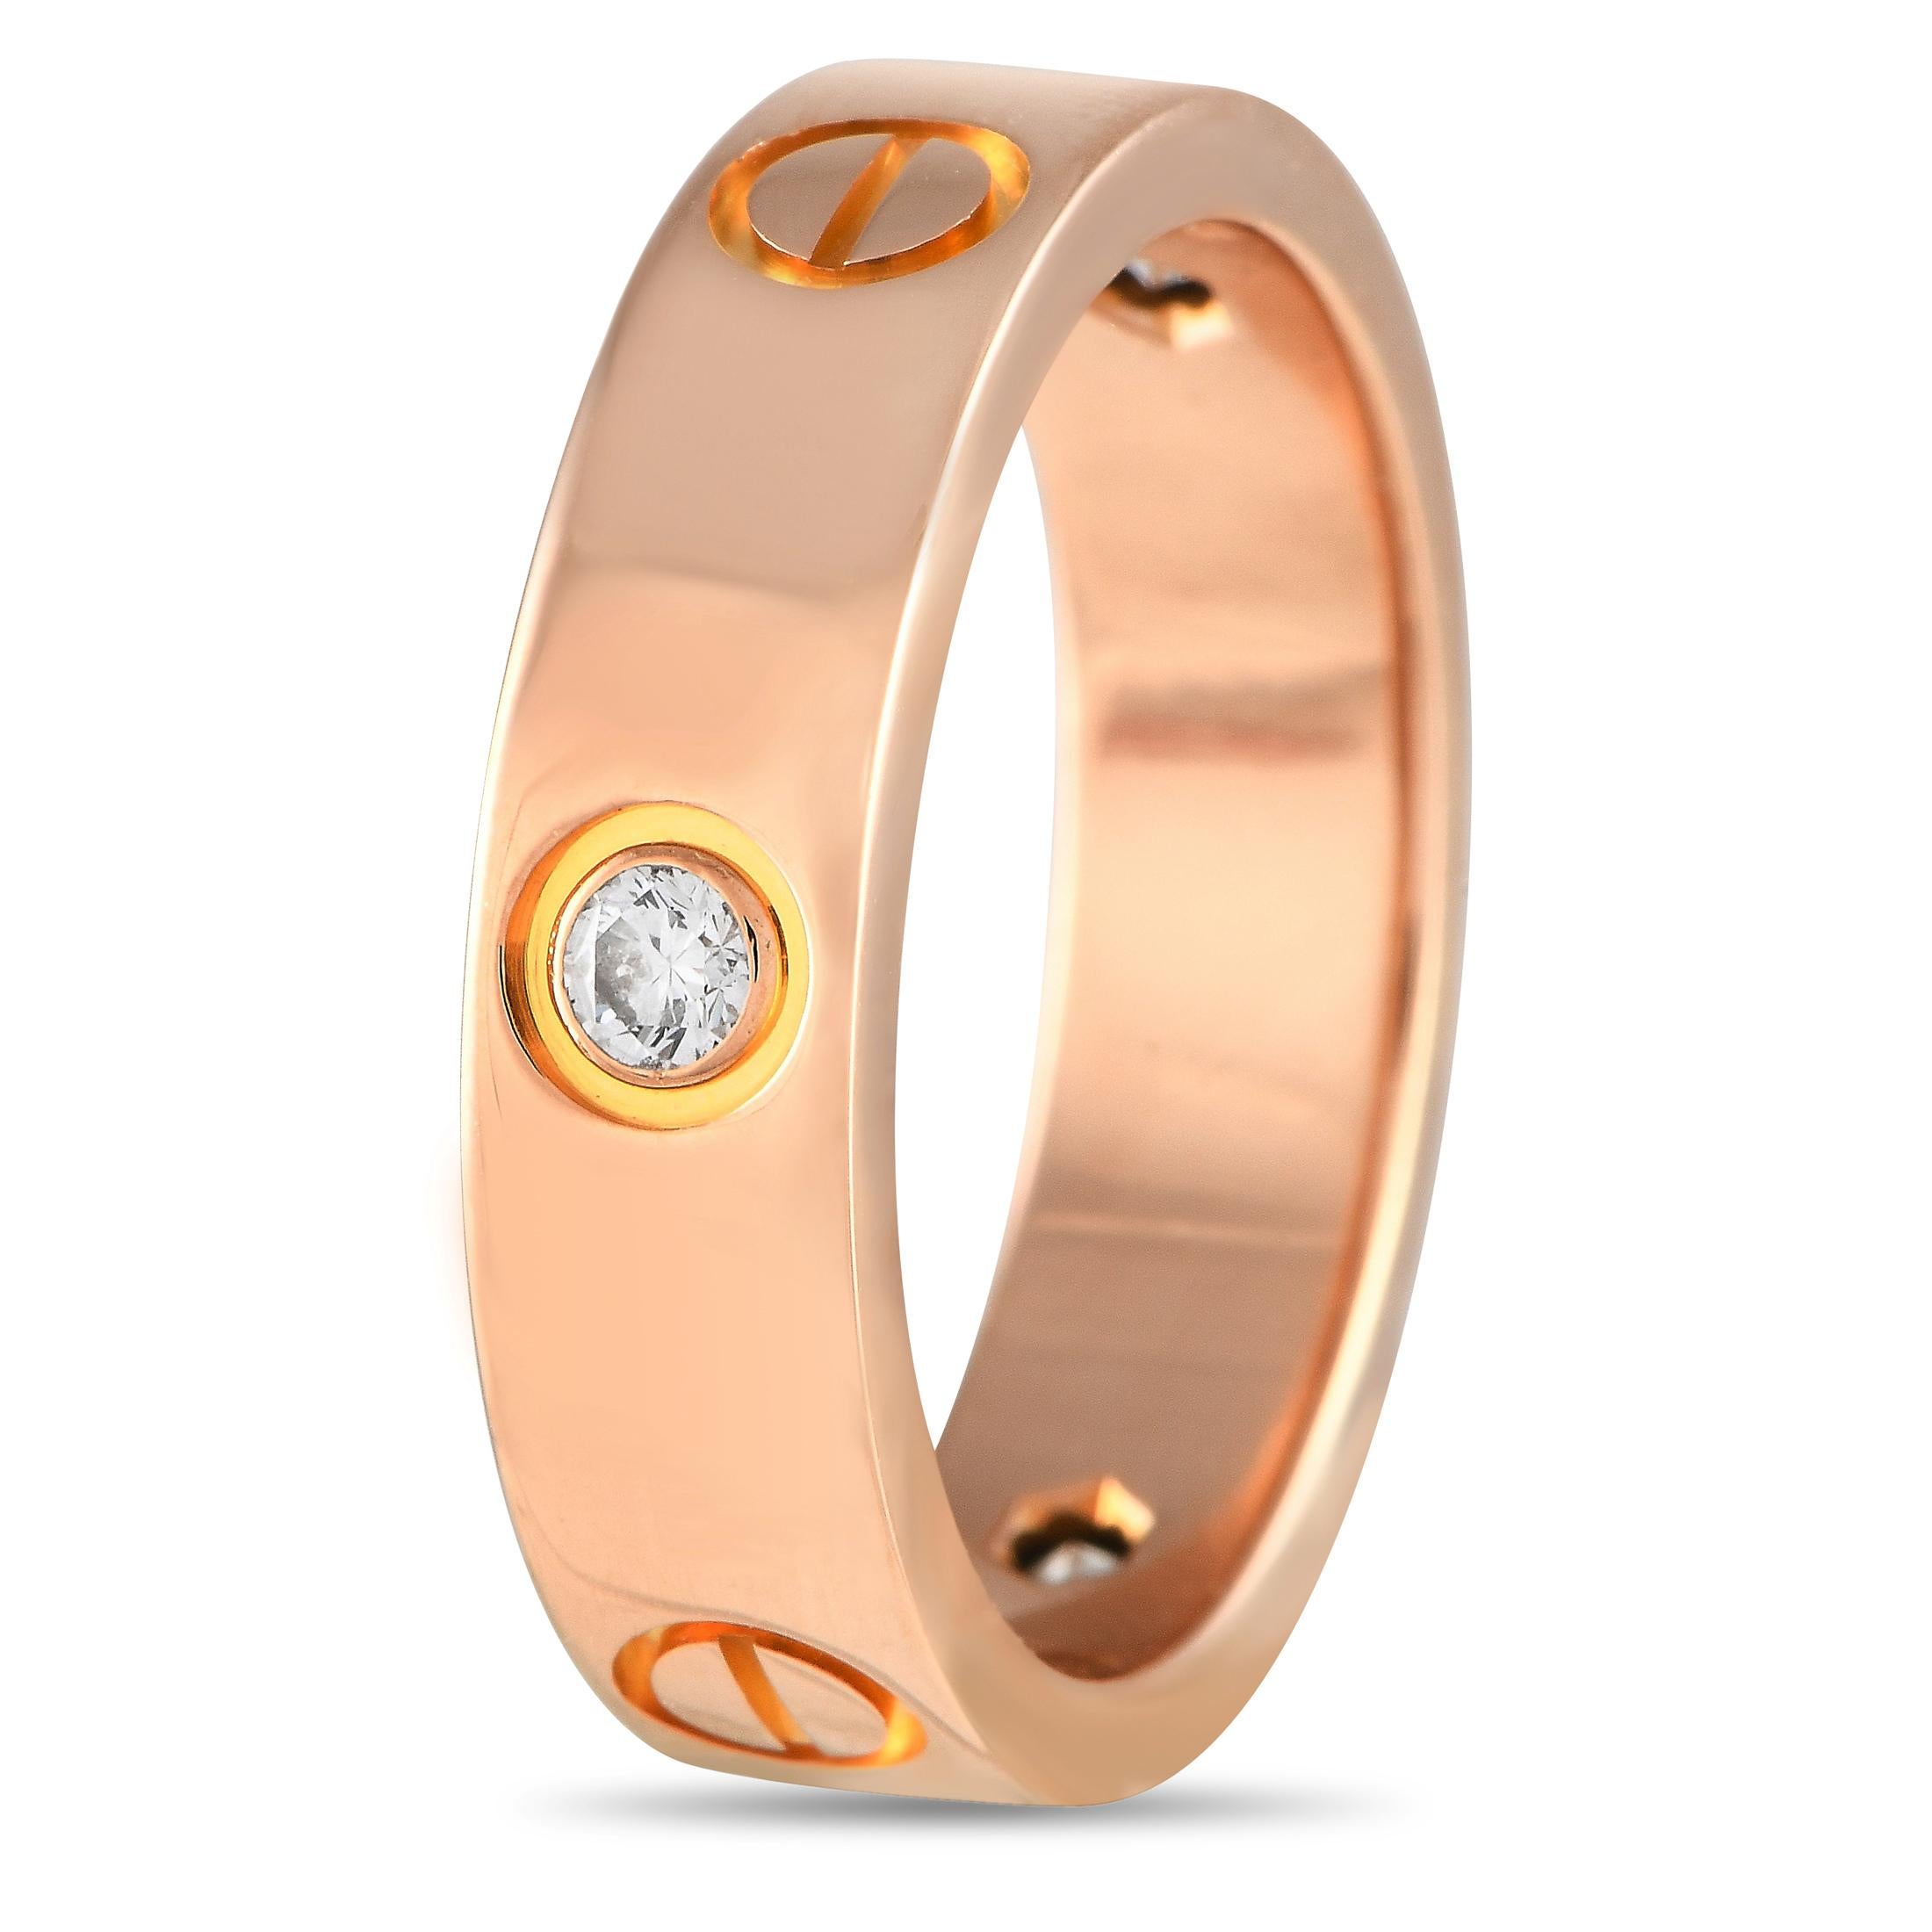 From Cartier's LOVE Collection, here is an instantly recognizable ring crafted in solid 18K rose gold and set with three brilliant-cut diamonds. The LOVE ring features a 5mm-thick band with a top height of 1mm. It carries three diamonds totaling